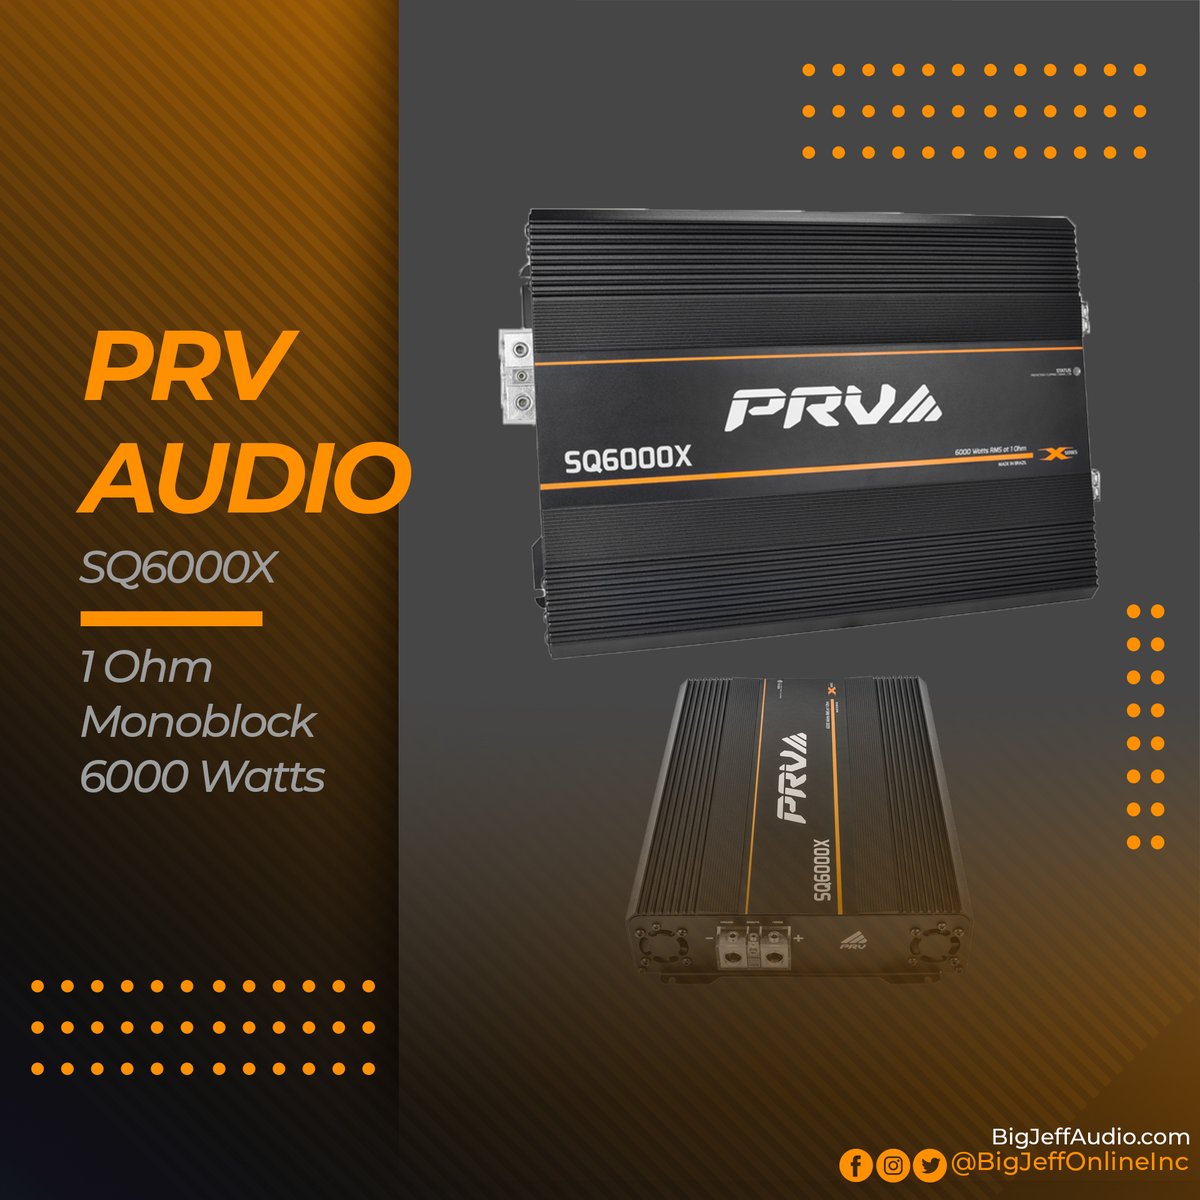 New arrival from PRV Audio! The SQ6000X monoblock is ready to ship!

bigjeffaudio.com/products/prv-a…

#BigJeffOnline #BigJeffAudio #BigJeff #Ocala #CarAudio #ProAudio #BassHeads #BigSound #PRVAudio #PRV #Amplifier #6000W #Monoblock #1Channel